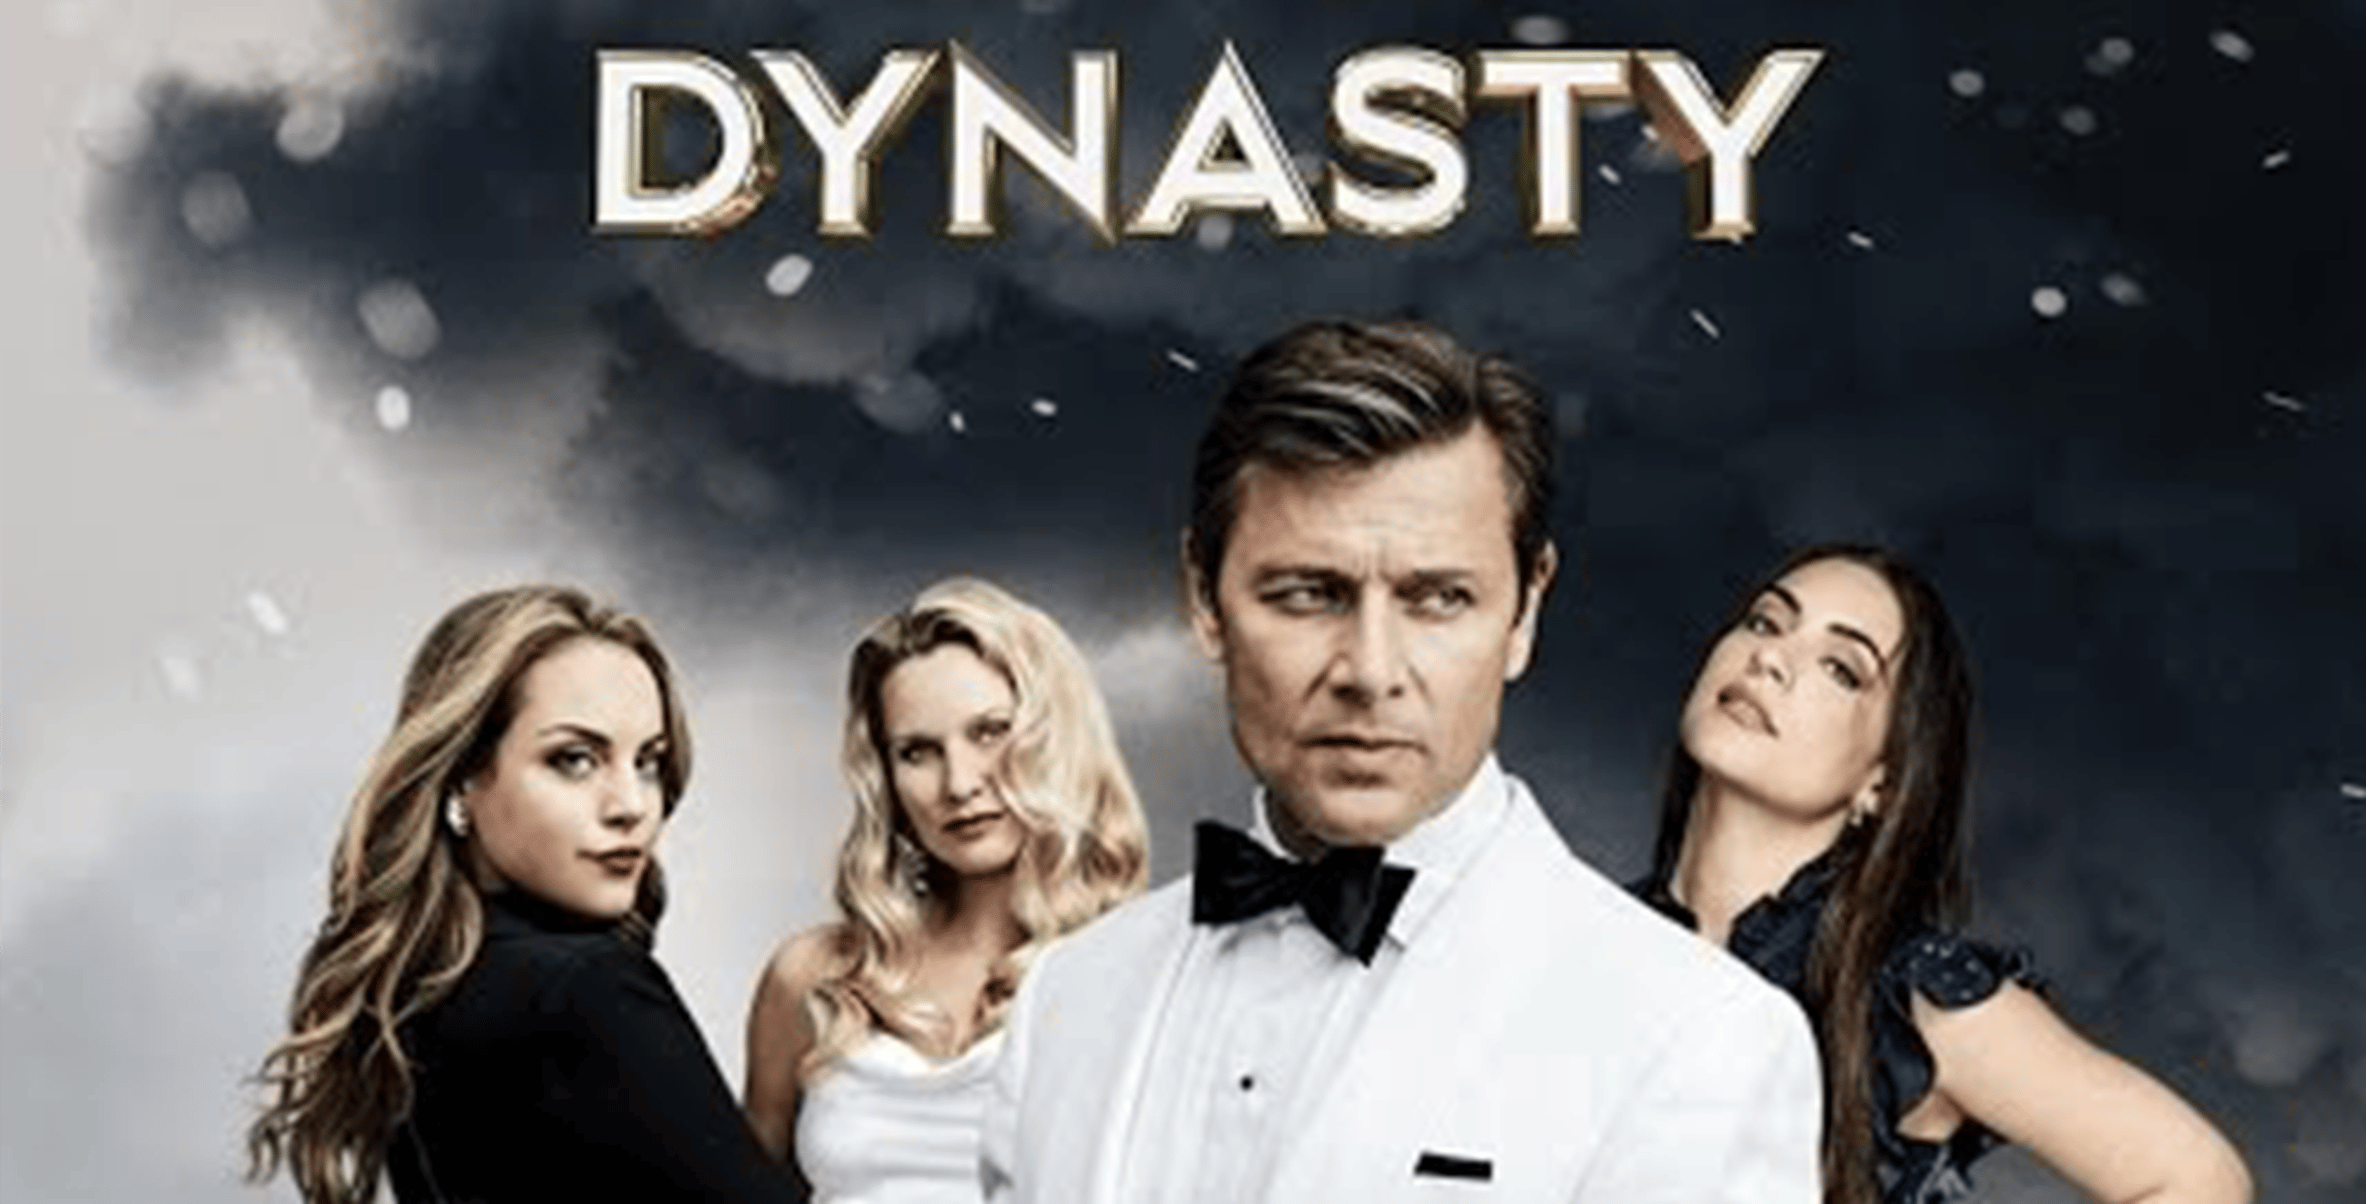 Casting Courtroom Extra's For CW's Dynasty!